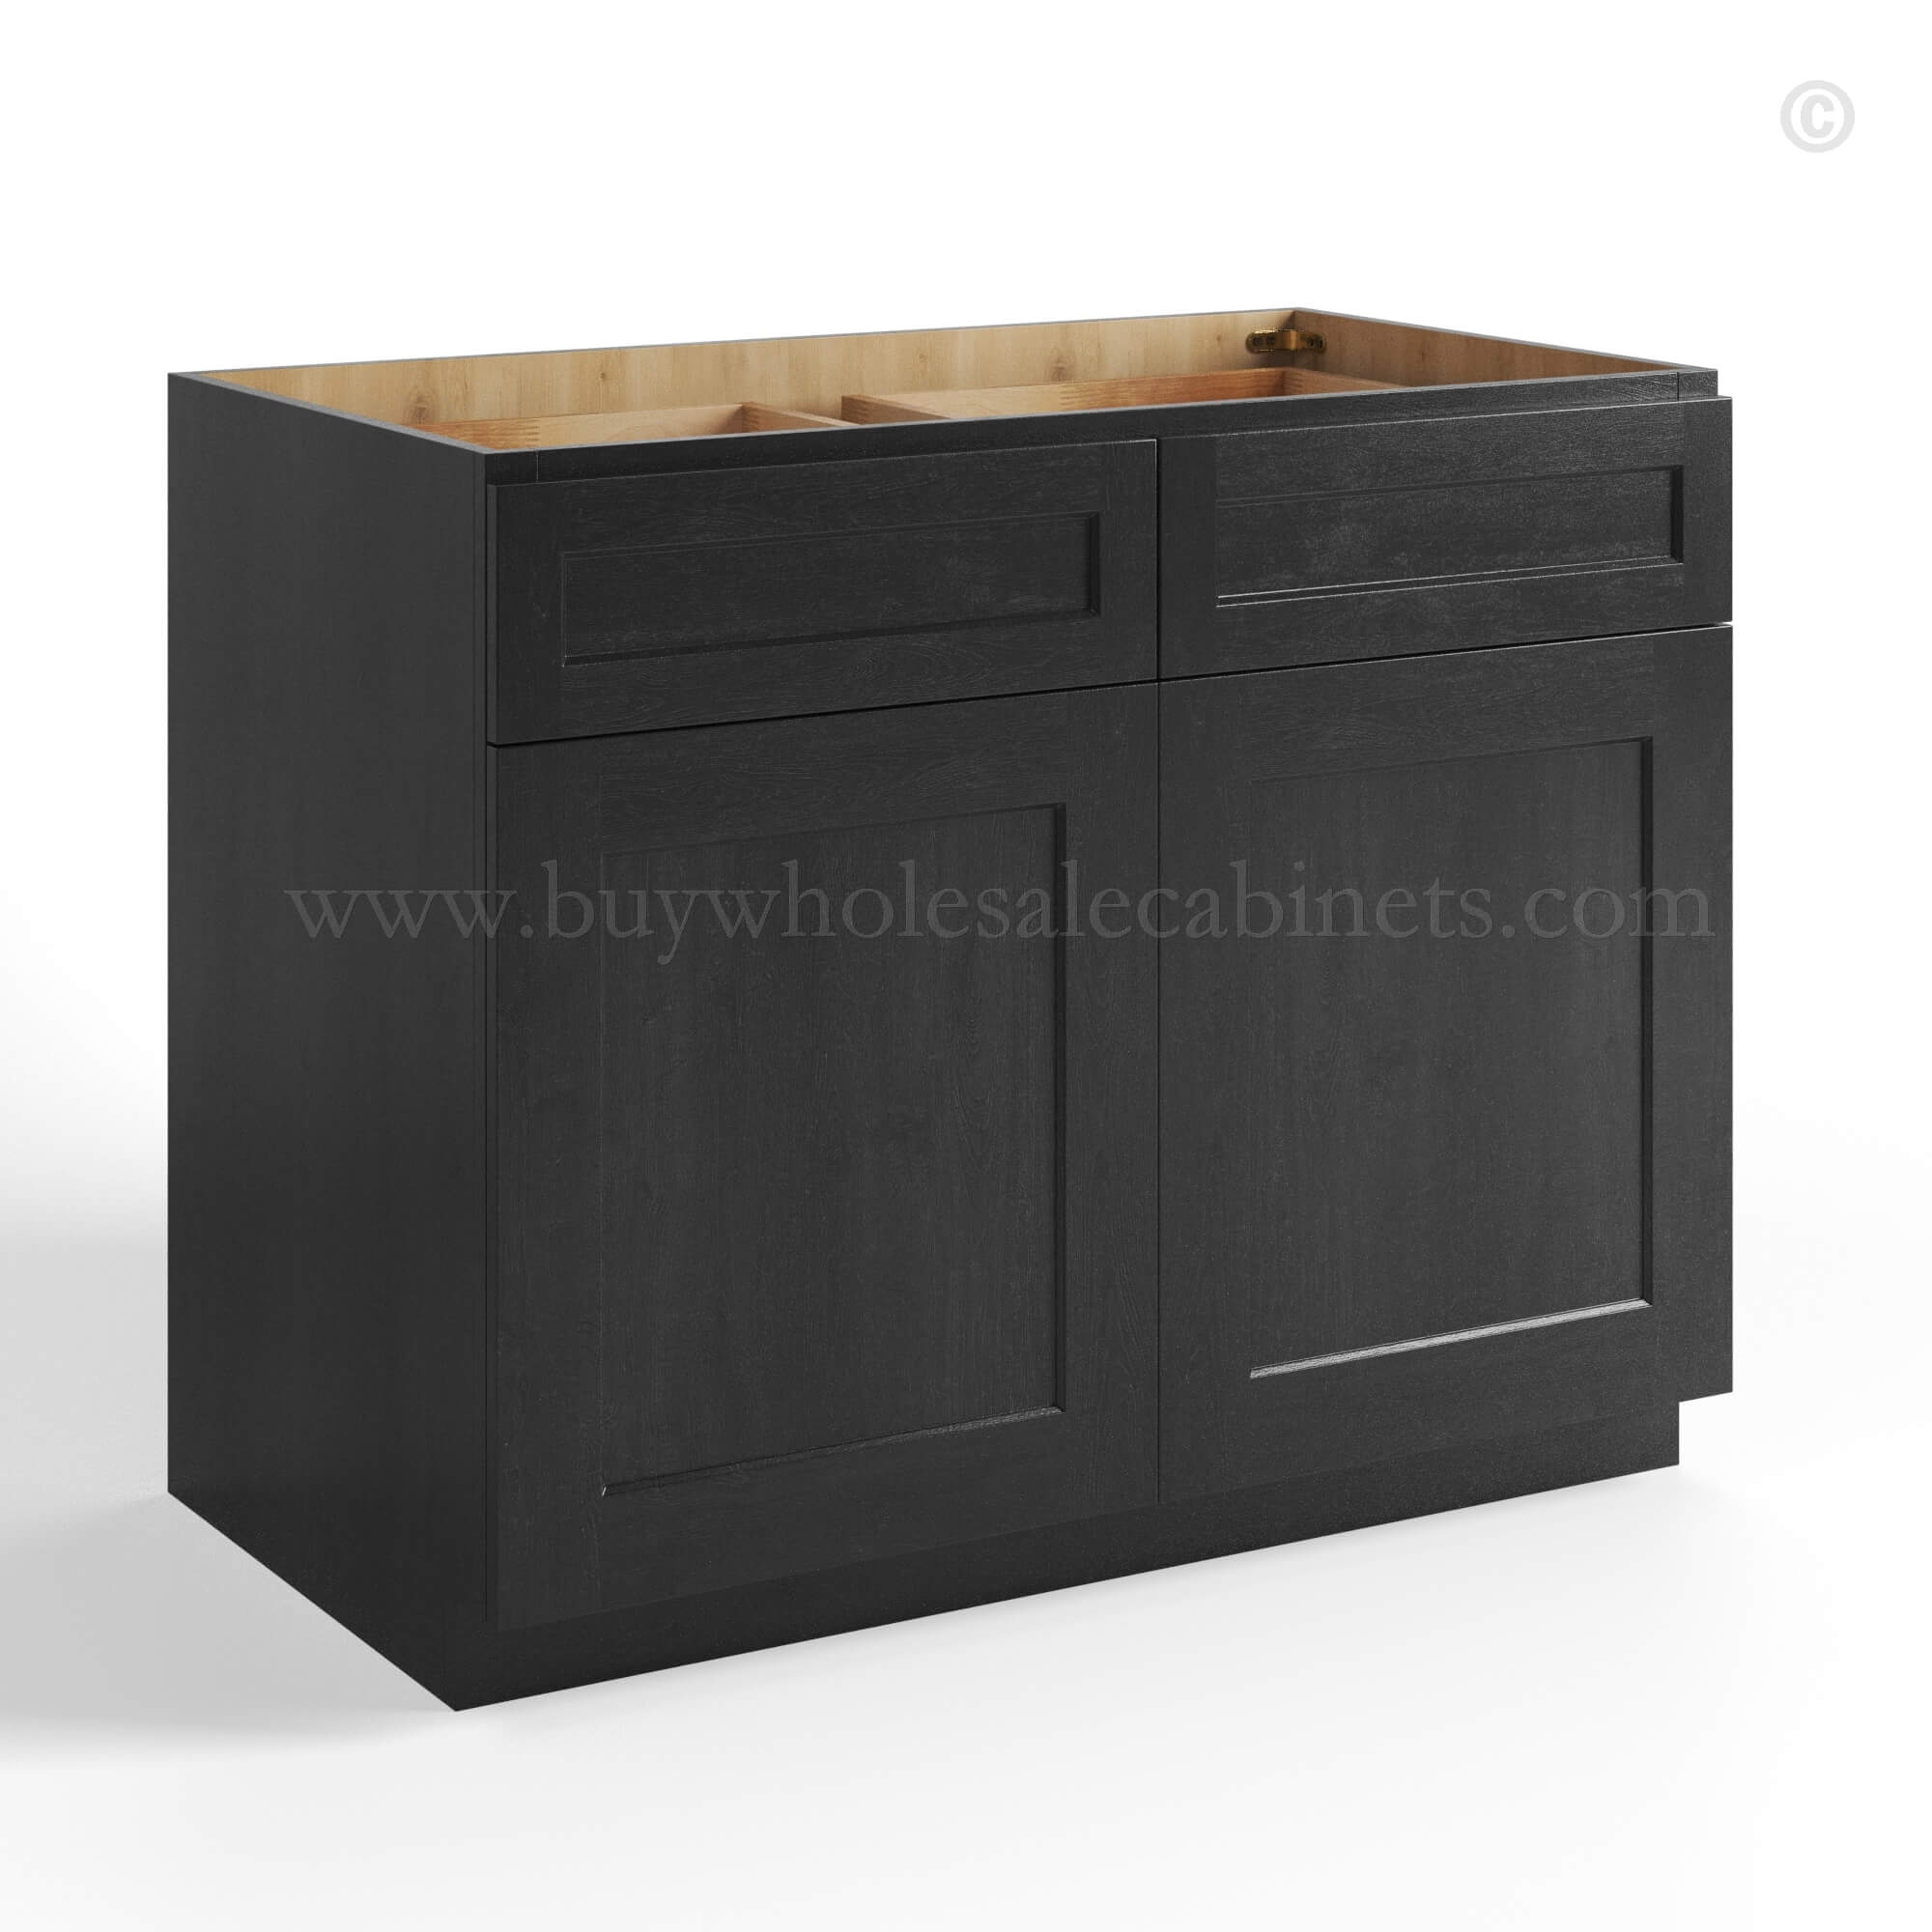 Charcoal Black Shaker Base Cabinet Double Doors & Double Drawer, rta cabinets, wholesale cabinets